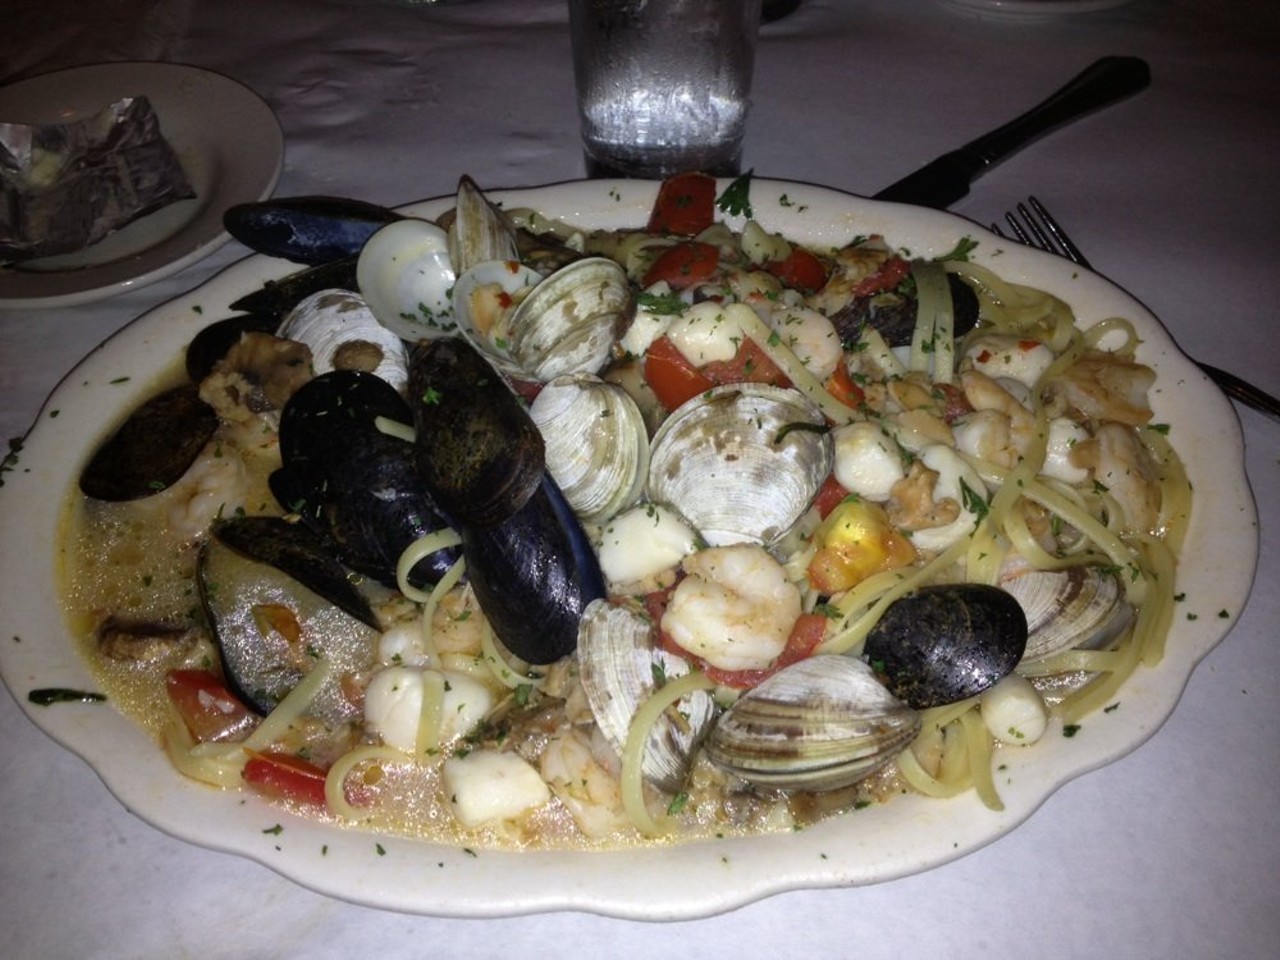 Gian-Tony's Ristorante
(5356 Daggett Ave., 314-772-4893)
With steak, seafood, pasta and veal, Gian-Tony&#146;s is everything wonderful that southern Italian cooking has to offer. It&#146;s also a great spot for a romantic date.
Photo courtesy of Mark F.